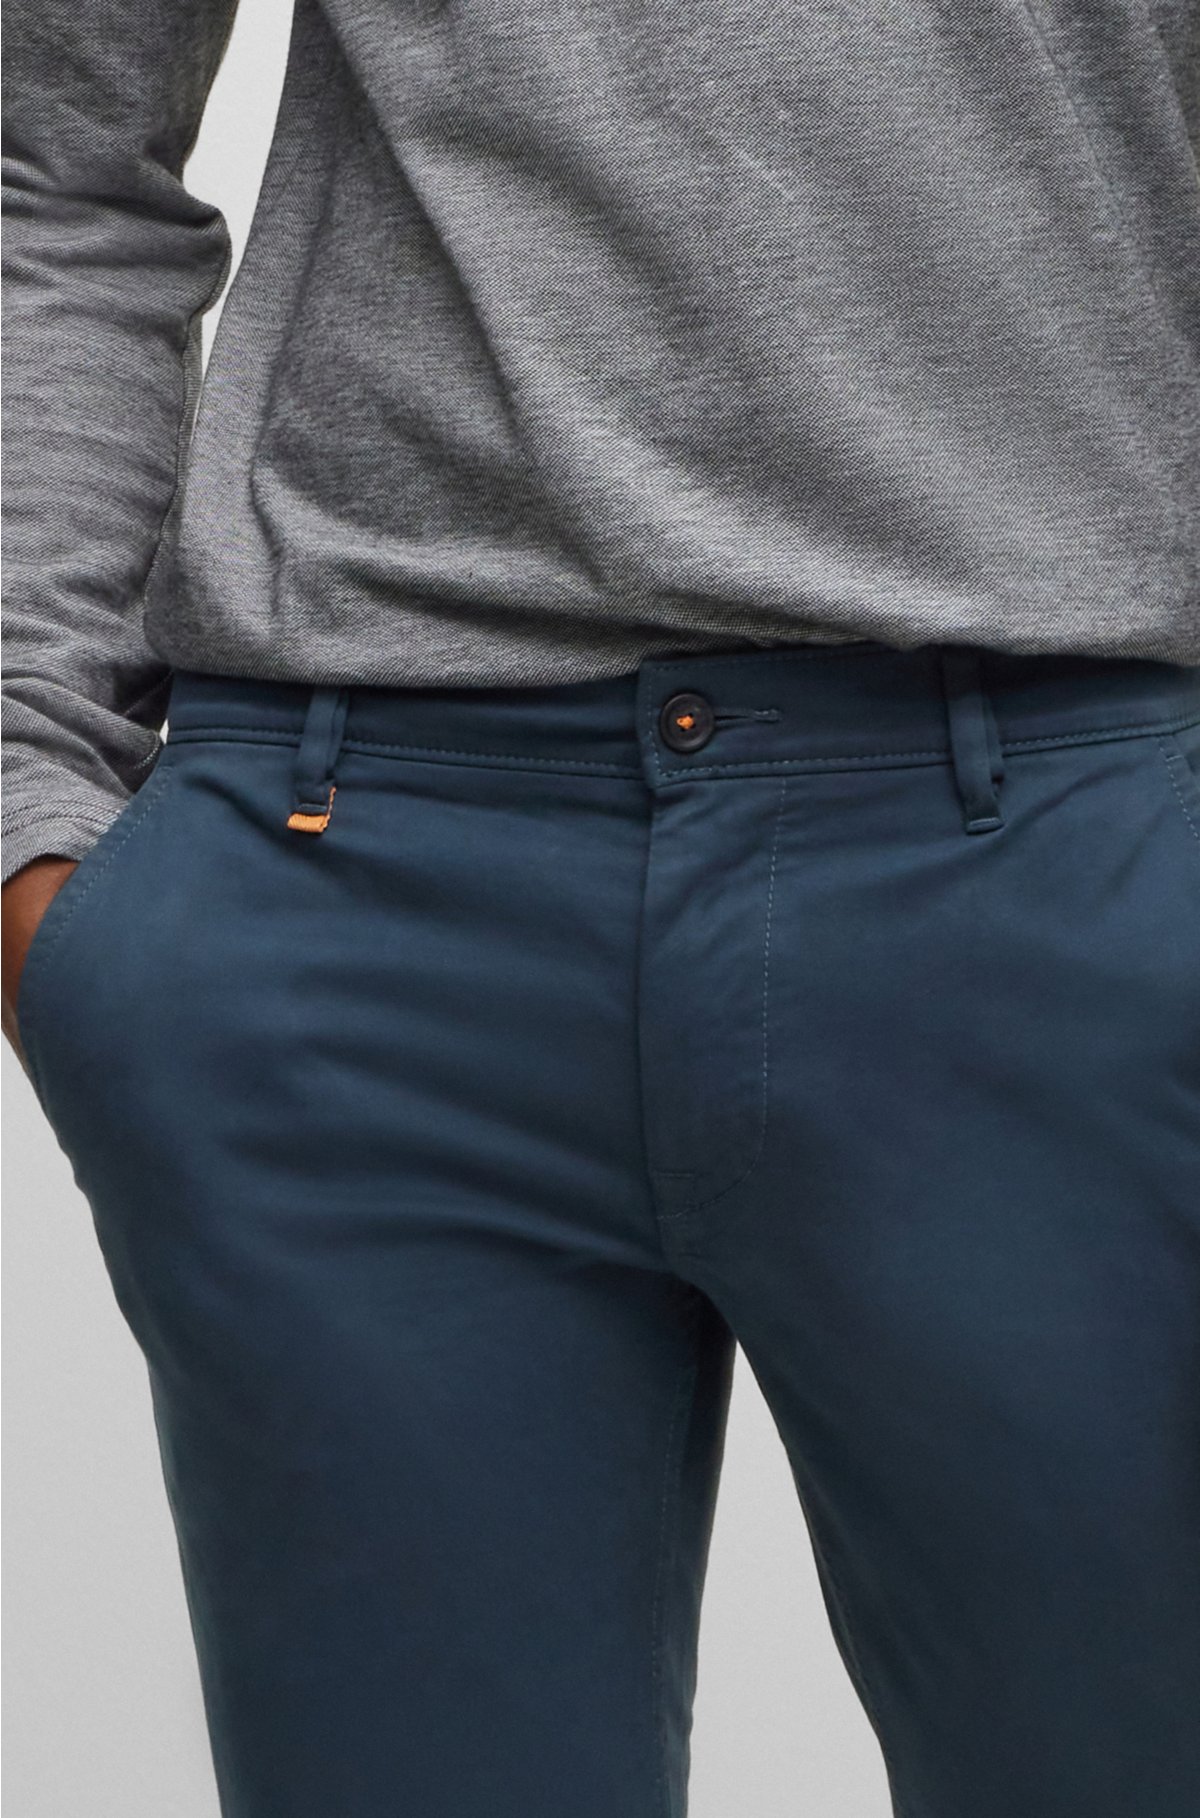 TROUSERS WITH SATIN WAISTBAND - Anthracite grey